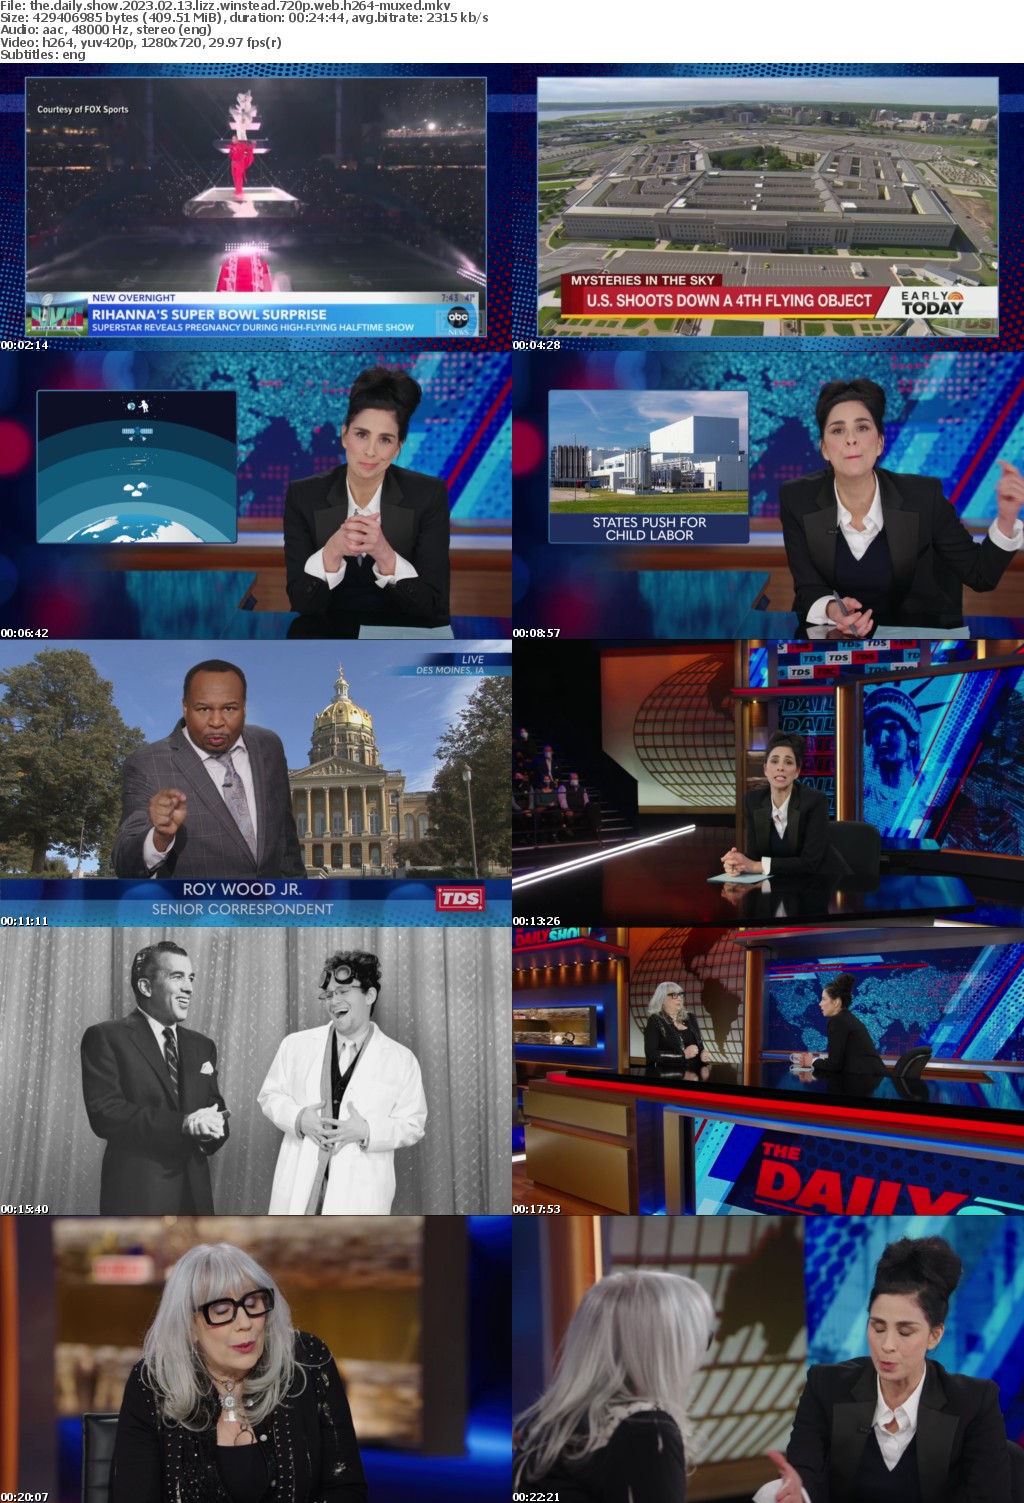 The Daily Show 2023 02 13 Lizz Winstead 720p WEB H264-MUXED